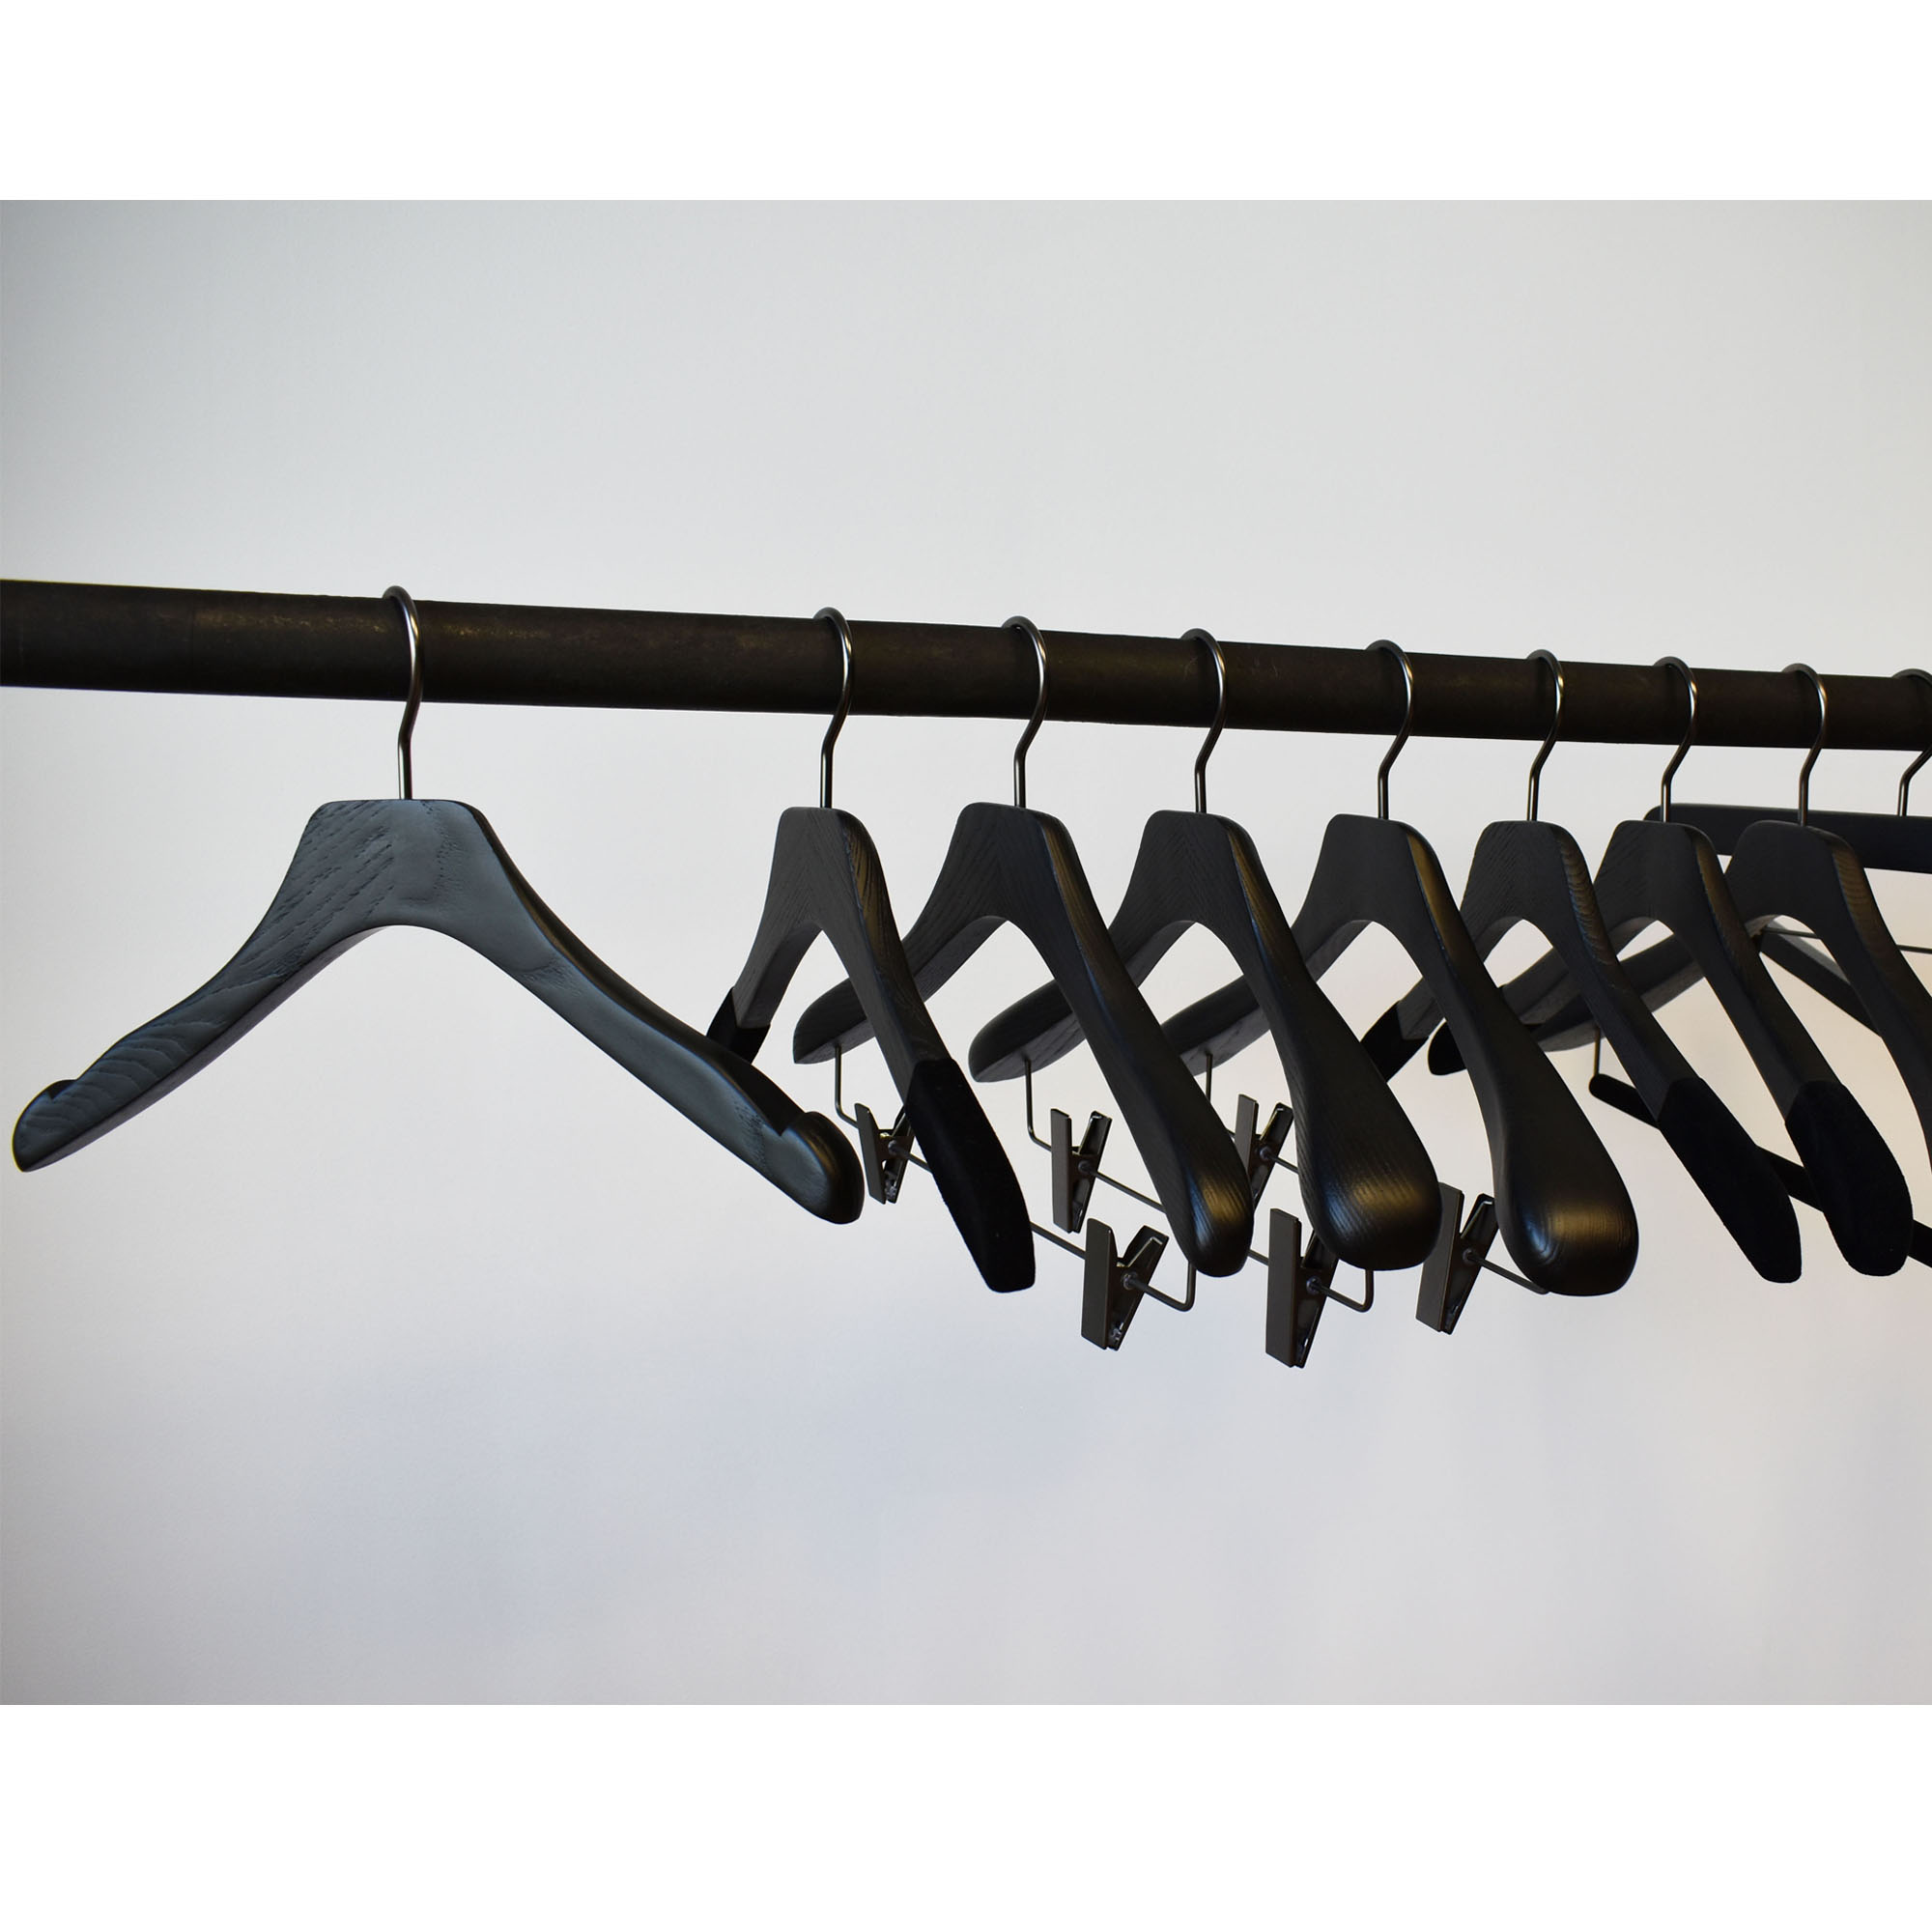 Quality wooden hangers with notches for dresses and tops